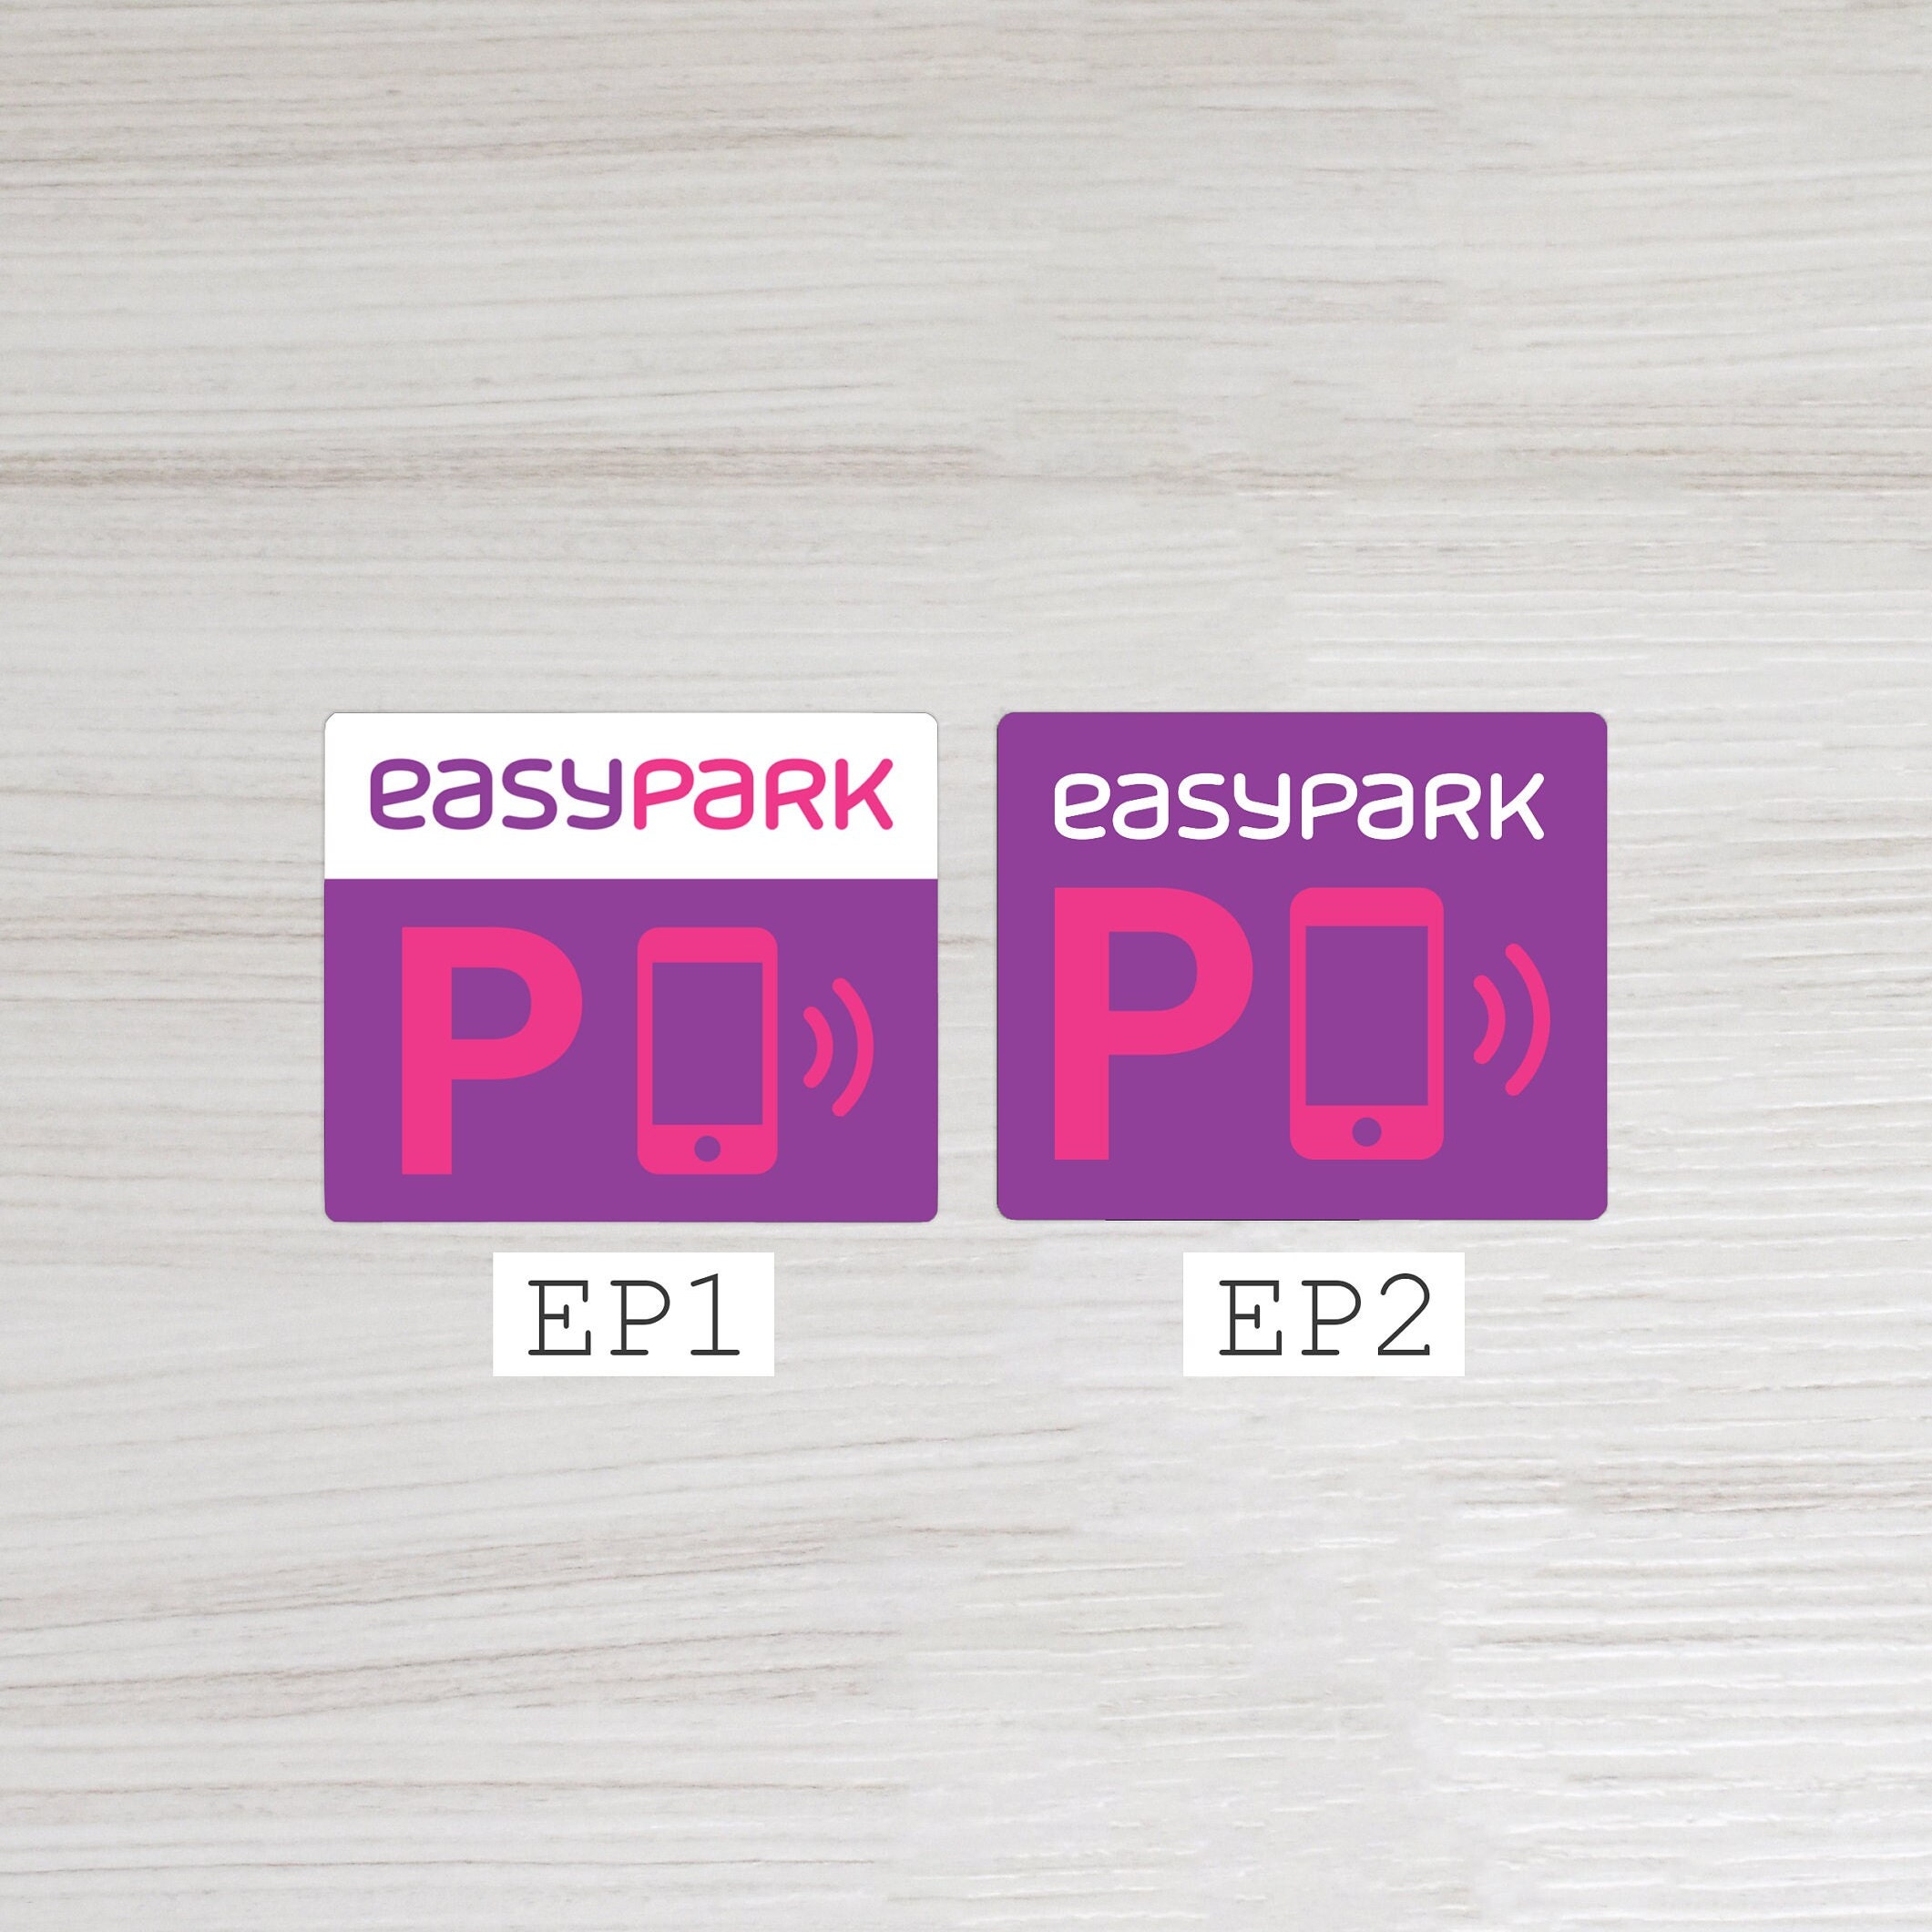 Exterior Windshield Application Easypark Sticker Parking App Solution  Sticker Easypark Parking Sticker Easypark App Accessory 